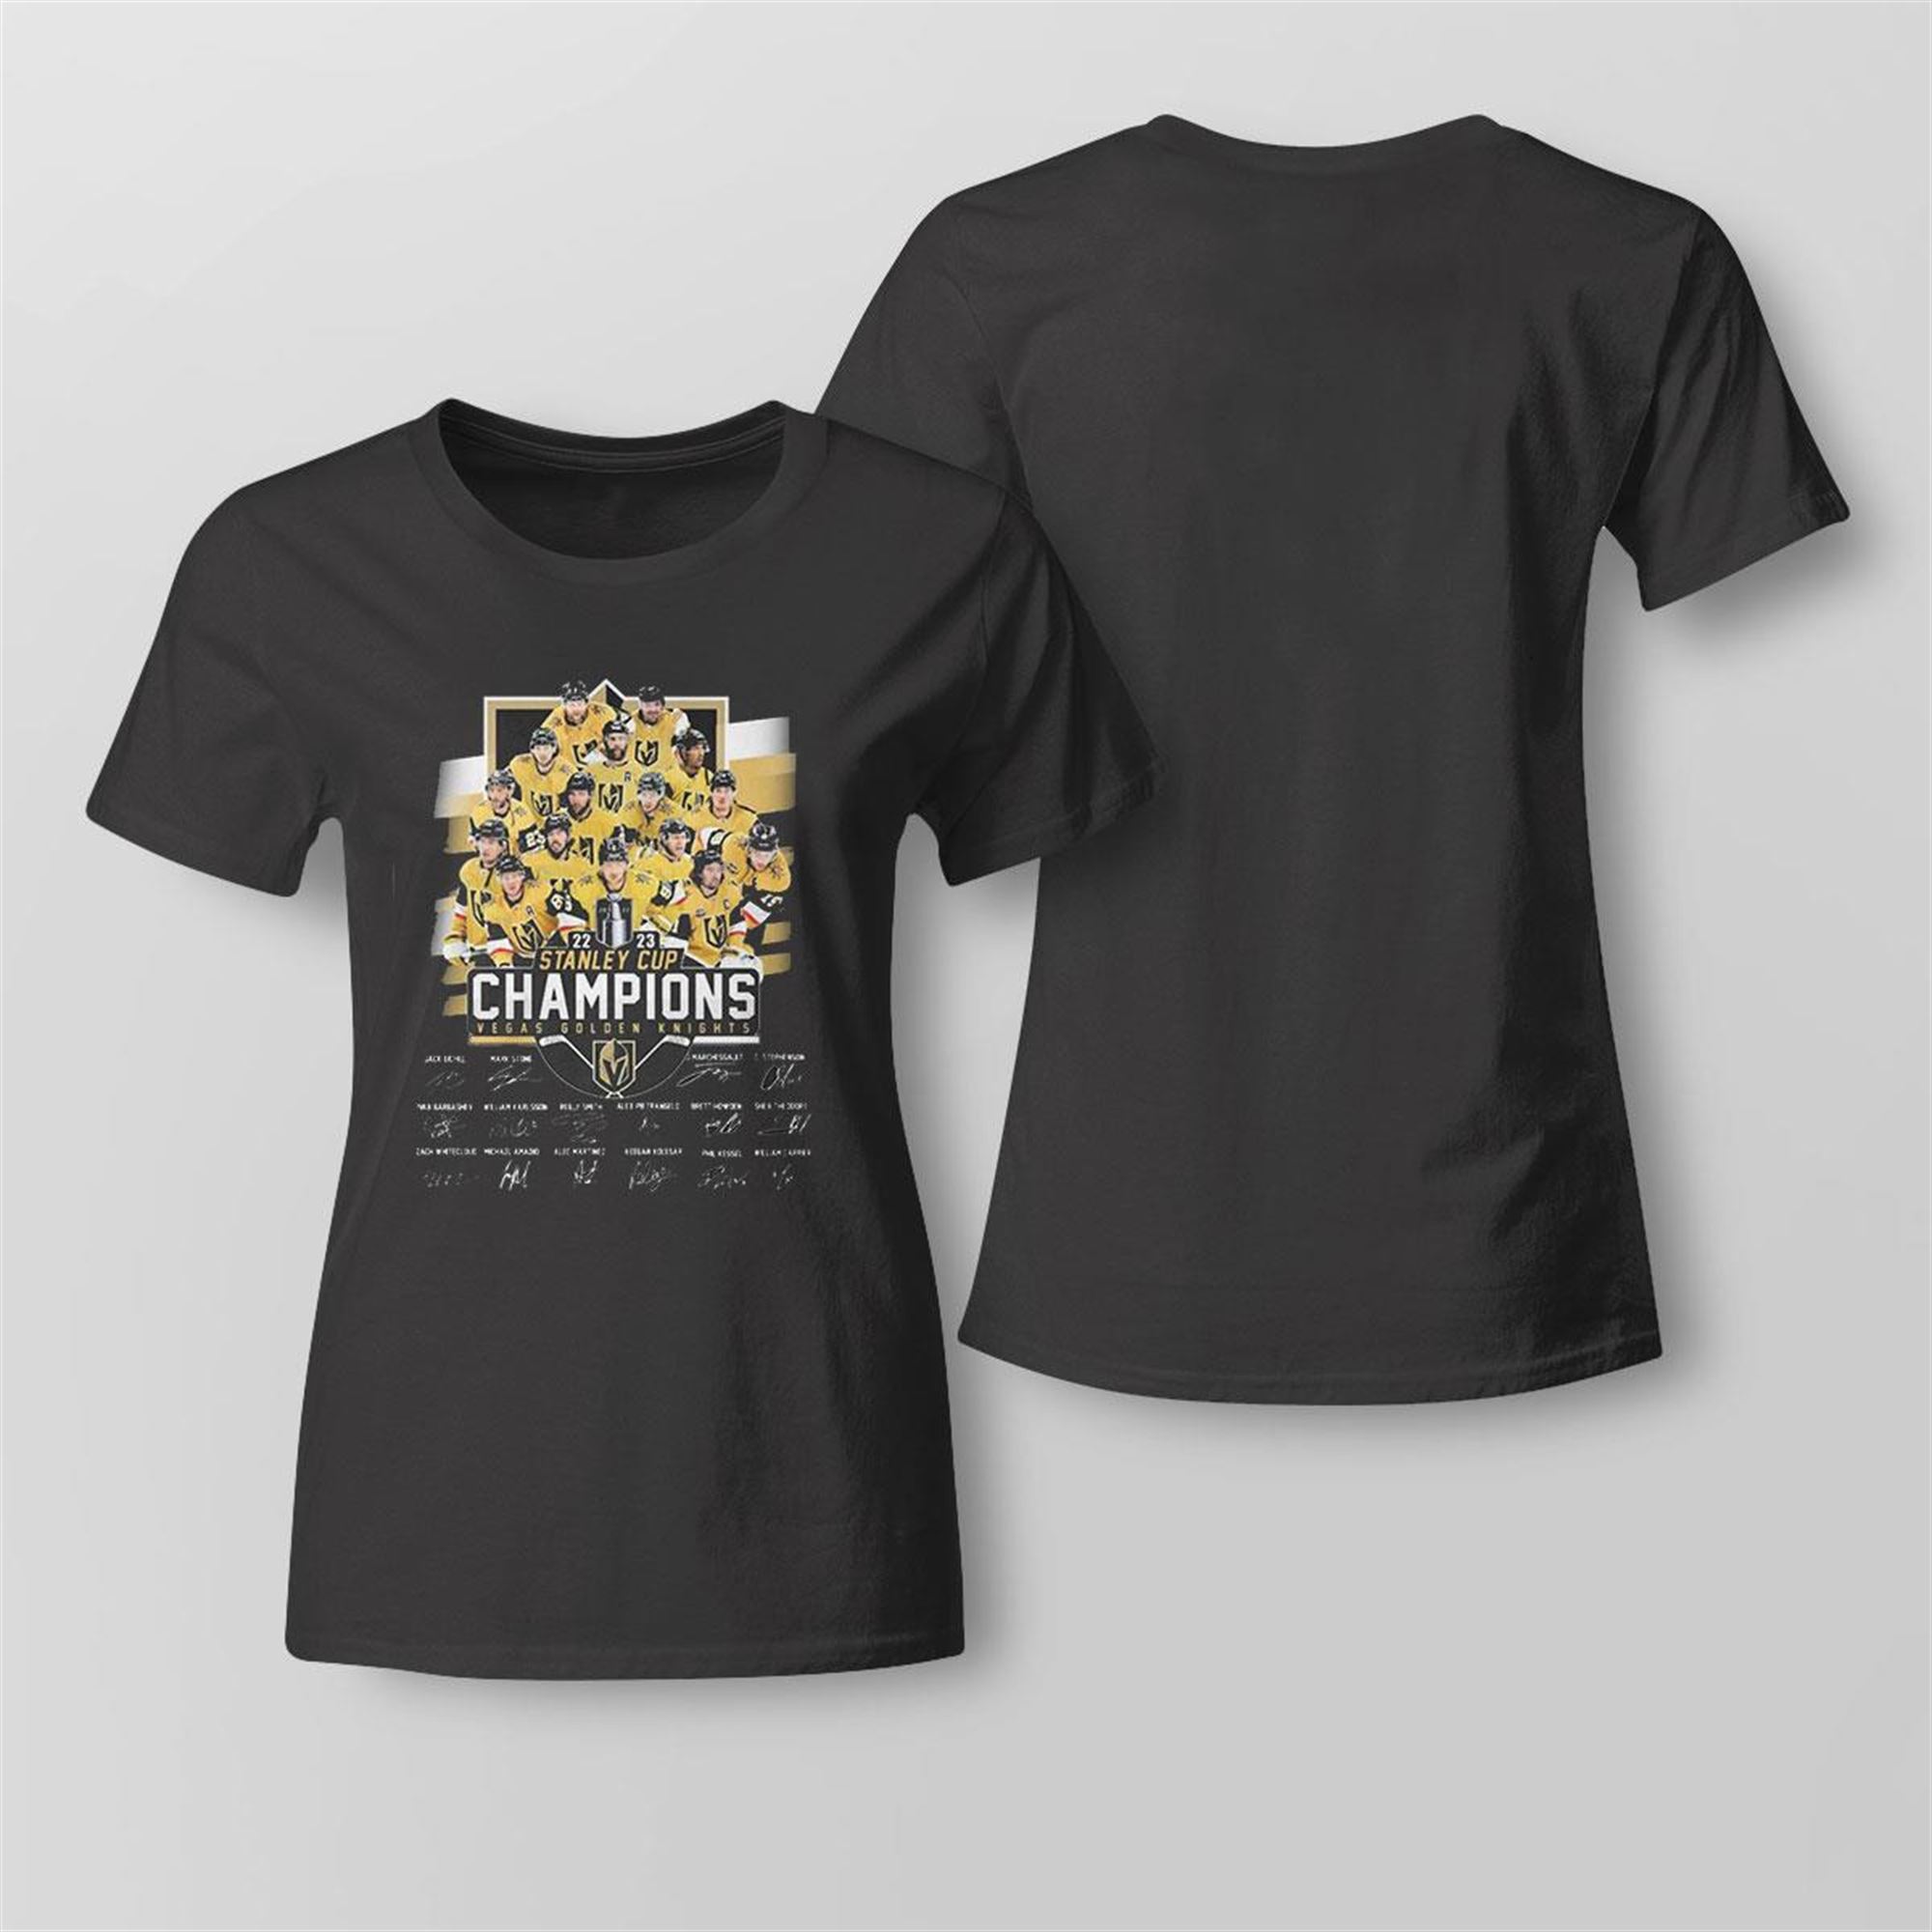 Official vegas Golden Knights Stanley Cup Champions 2023 T-Shirt